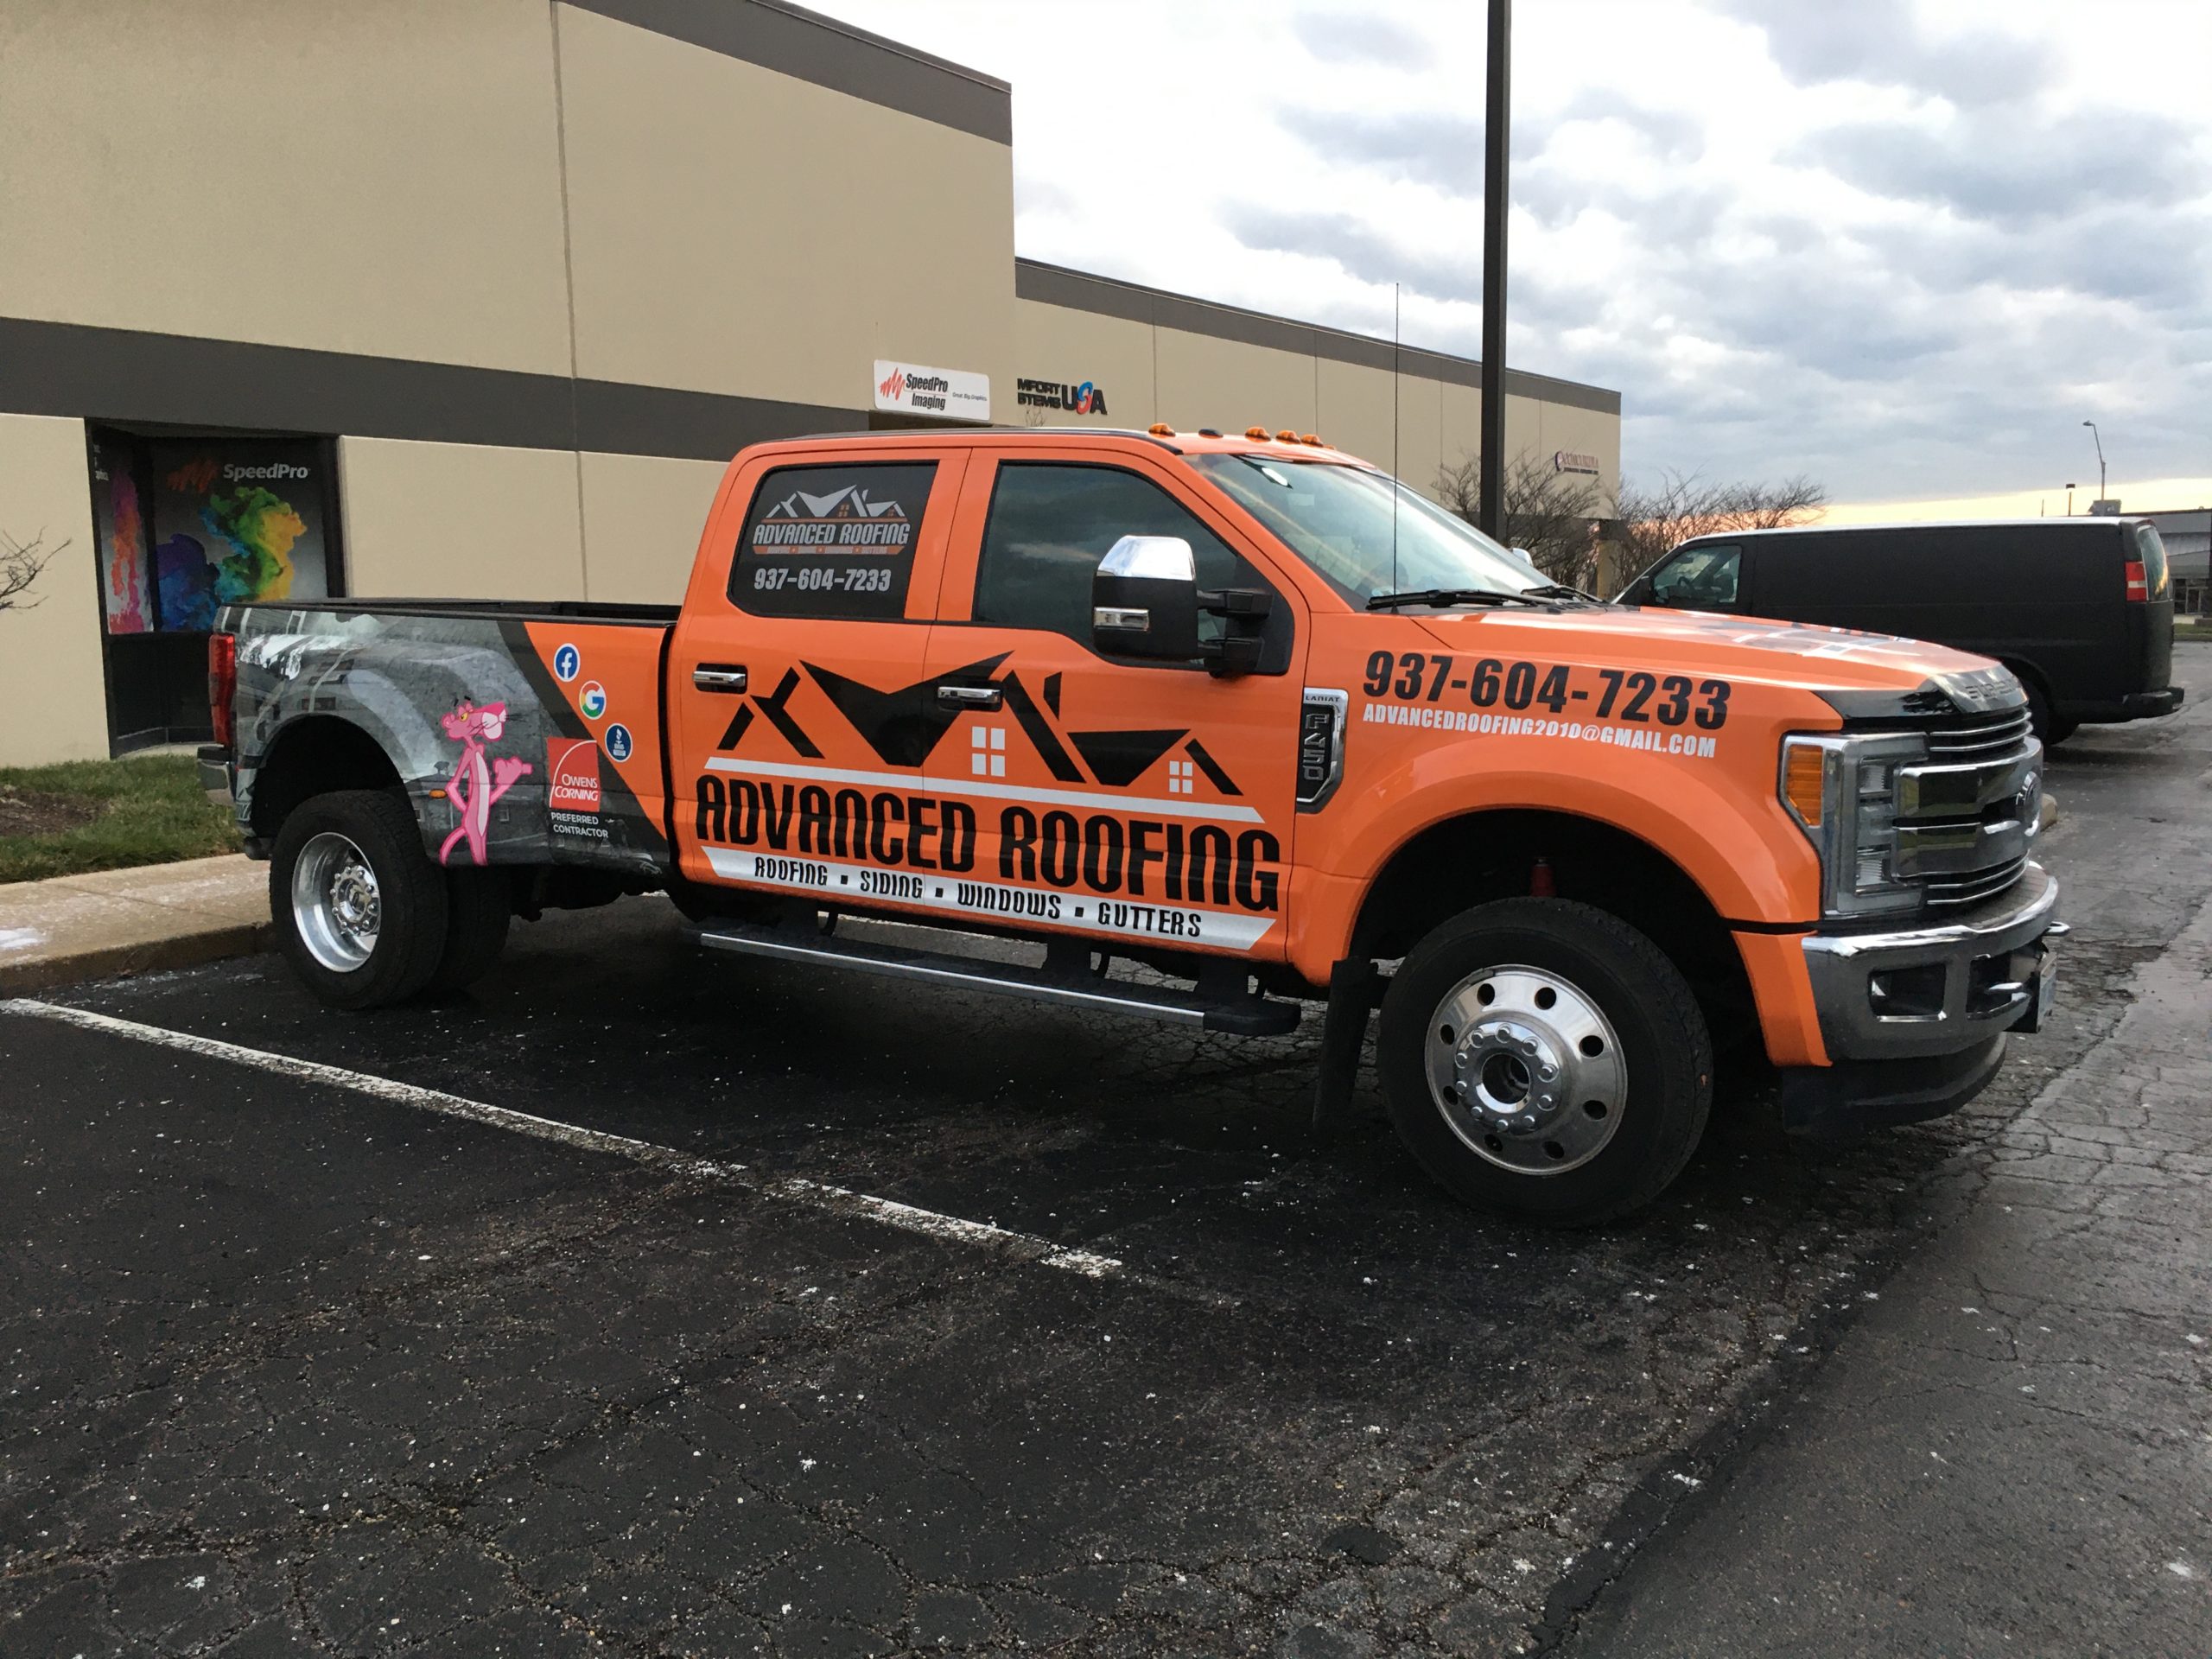 Roofing Company Vehicle Wraps